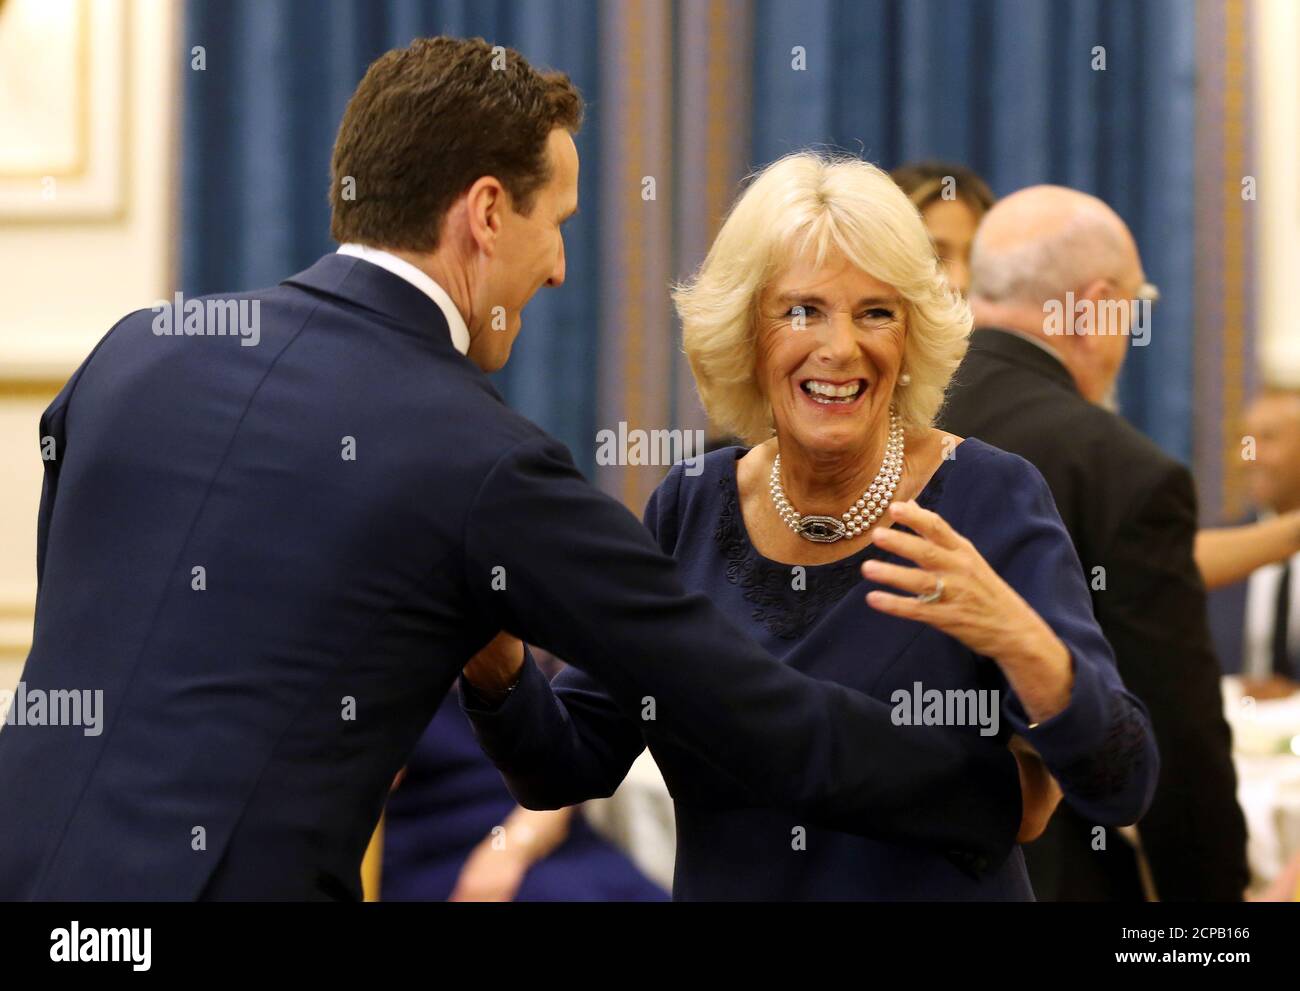 Britain's Camilla, Duchess of Cornwall, President of the National Osteoporosis Society, dances with 'Strictly Come Dancing' professional dancer Brendan Cole as she hosts a tea dance at Buckingham Palace in London, Britain November 22, 2017. Picture taken November 22, 2017.  REUTERS/Gareth Fuller/Pool Stock Photo